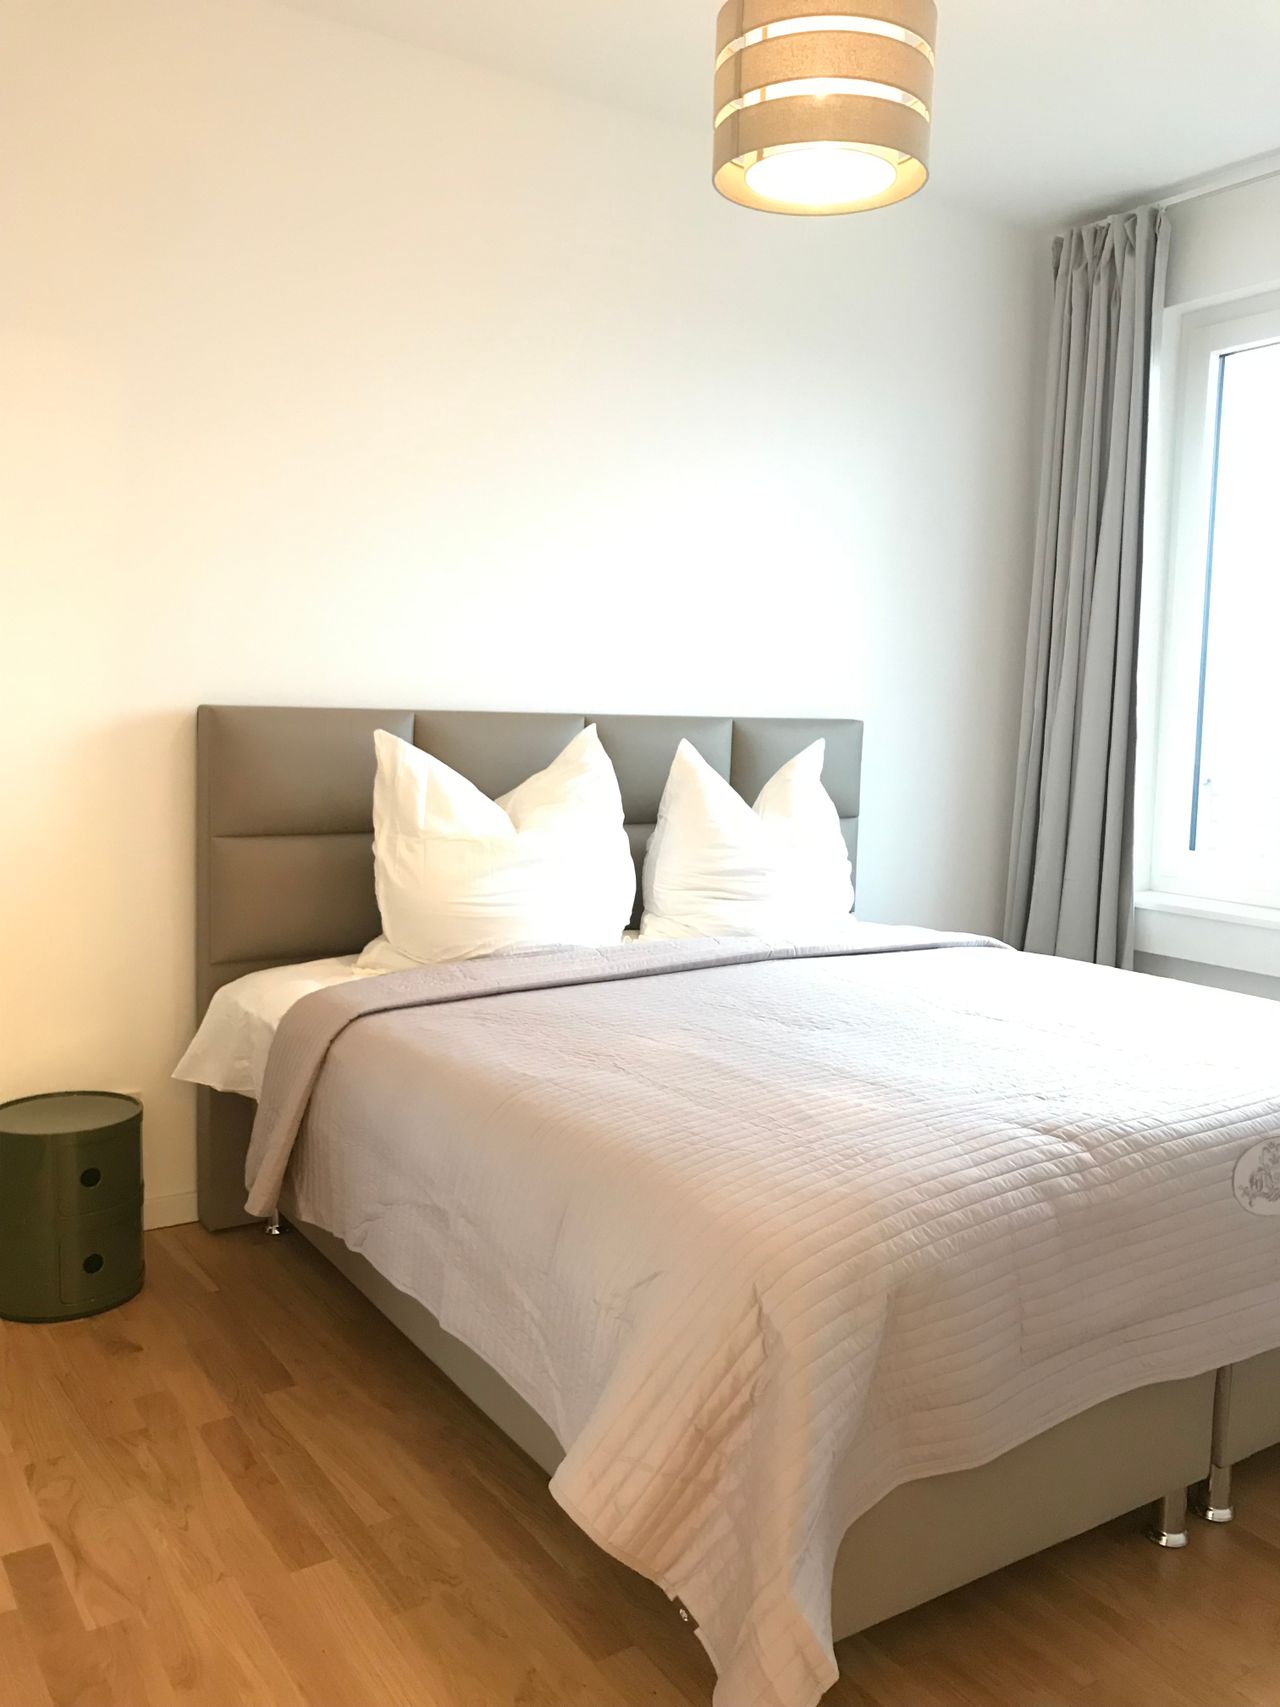 Gaby - cozy and luxurious apartment right at Potsdamer Platz